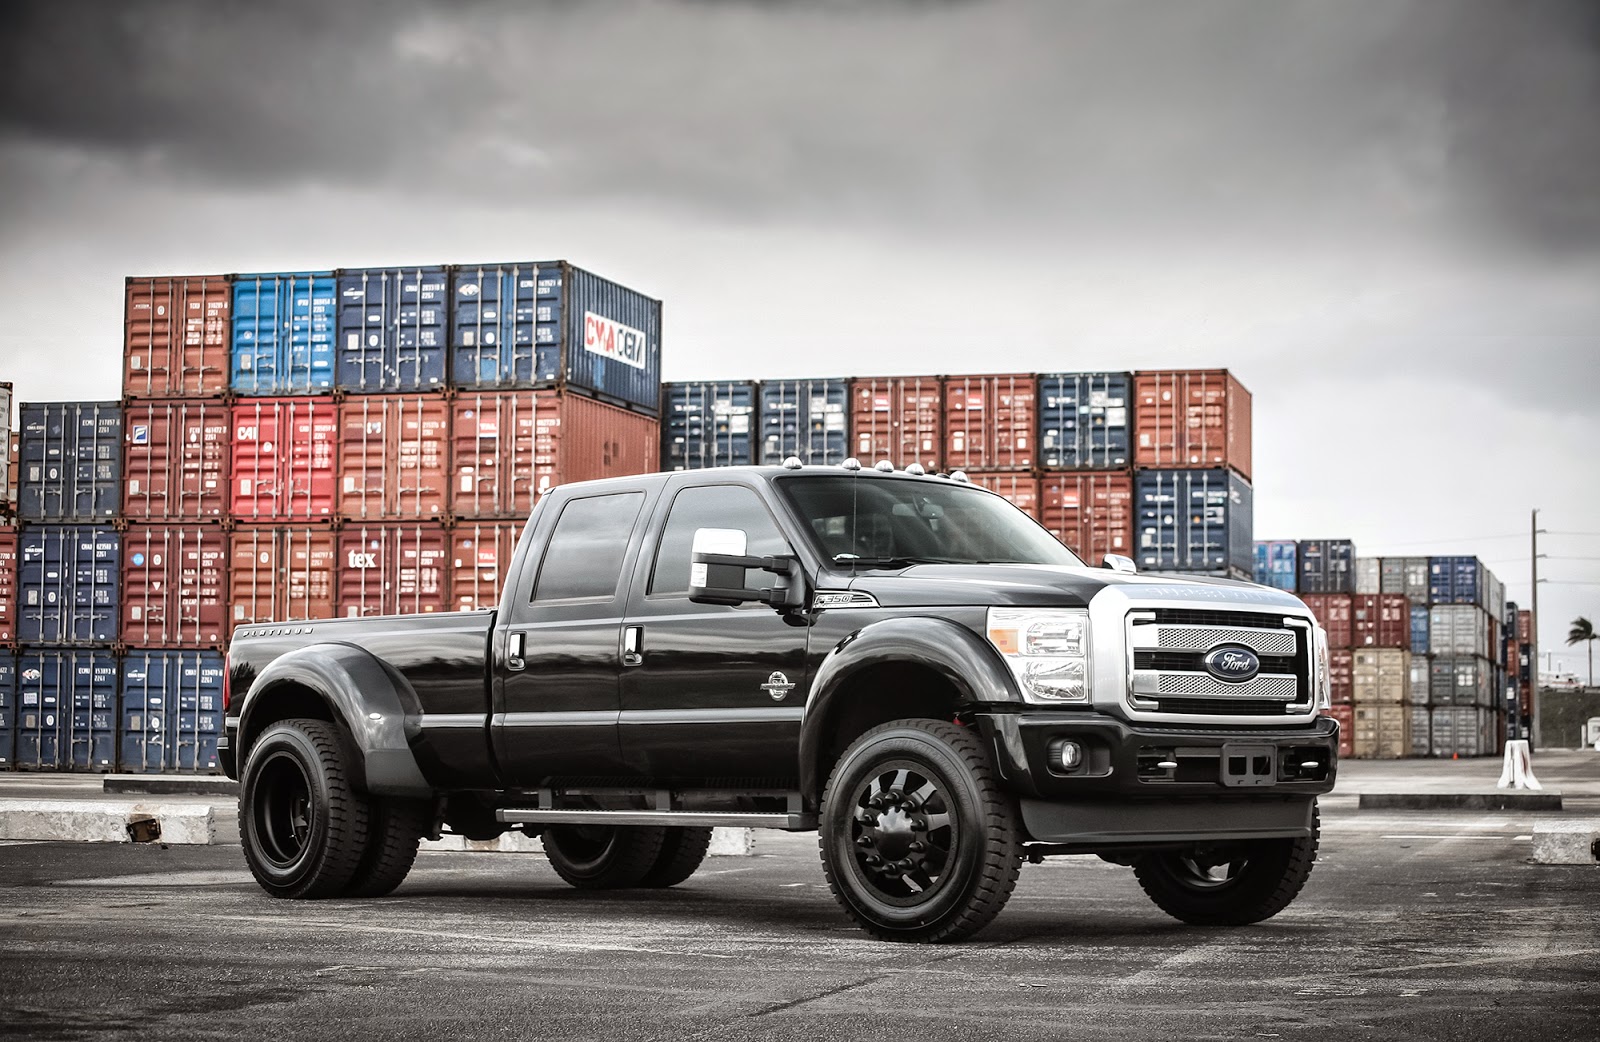 2017 Ford Dually Platinum | 2017 - 2018 Best Cars Reviews